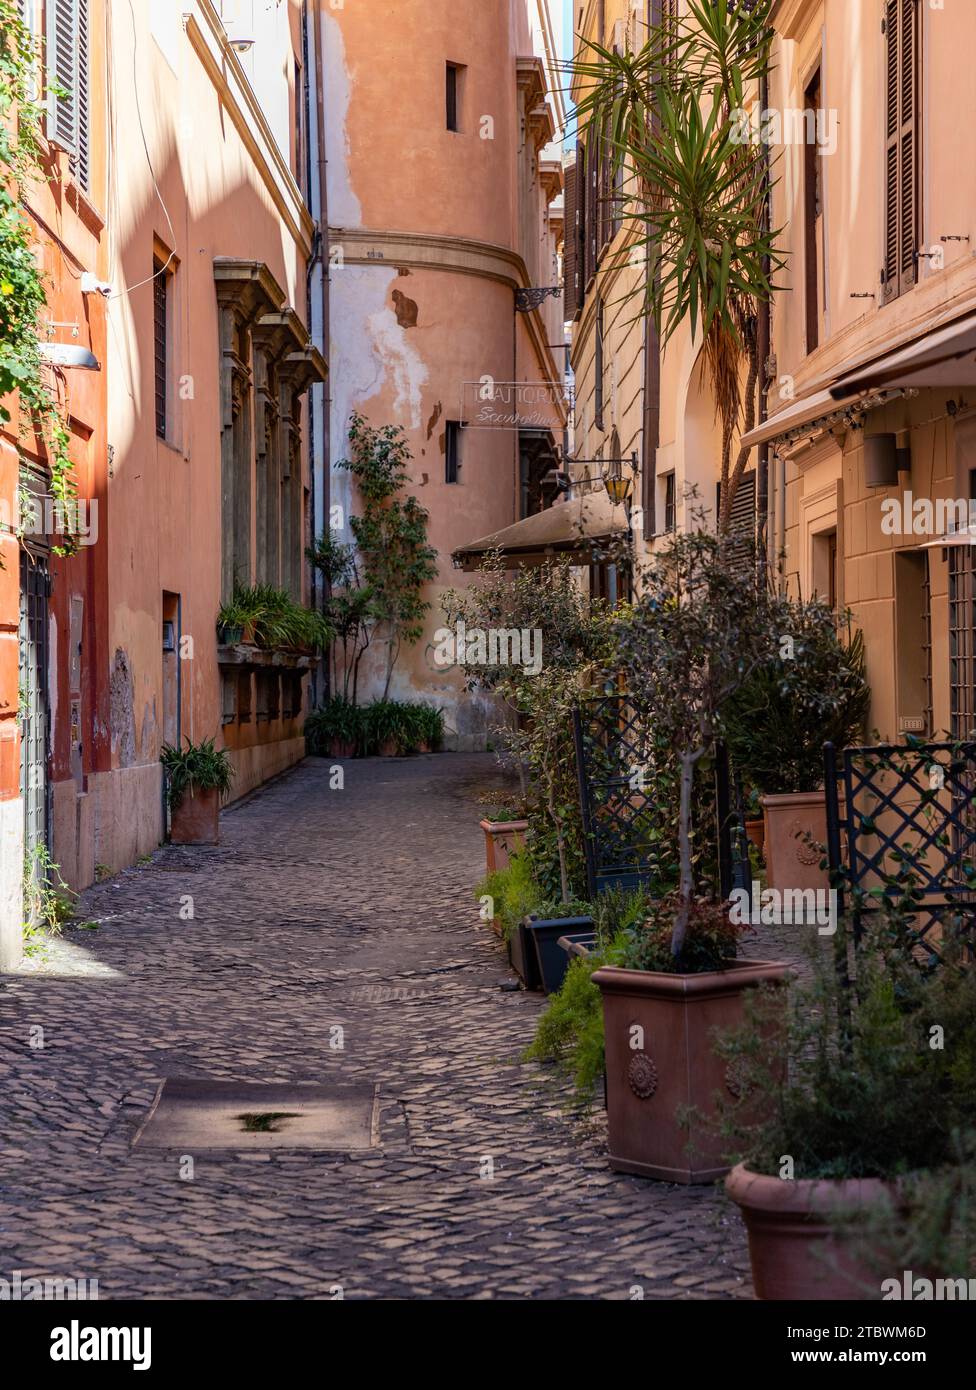 A picture of a picturesque, colorful and plant-laden alley in Rome Stock Photo